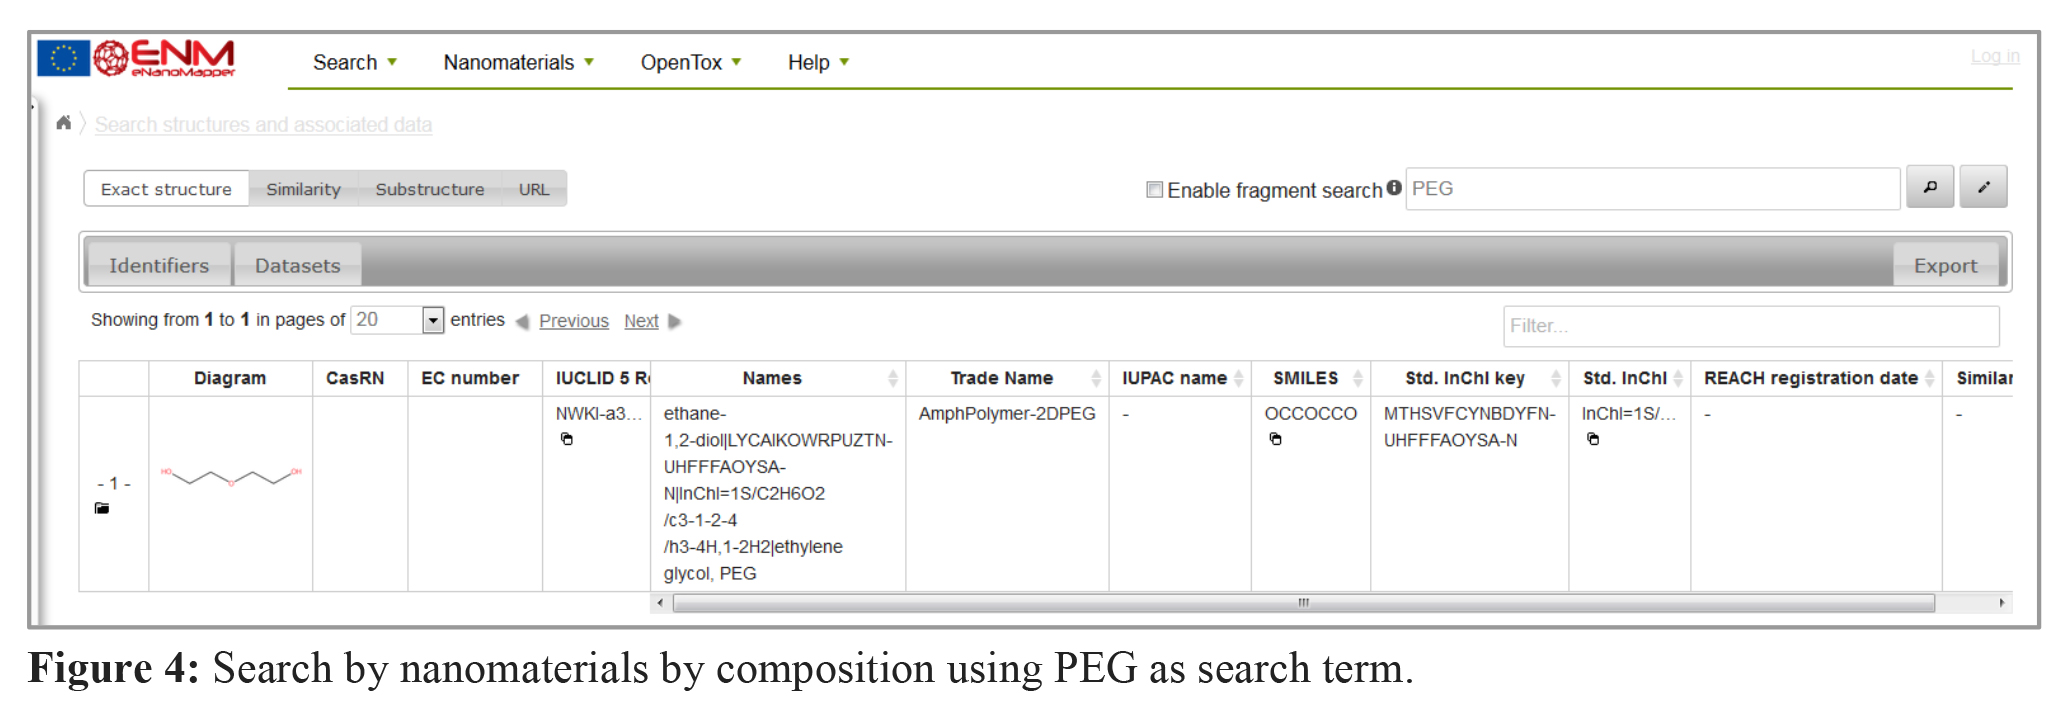 Figure 4: Search by nanomaterials by composition using PEG as search term. 